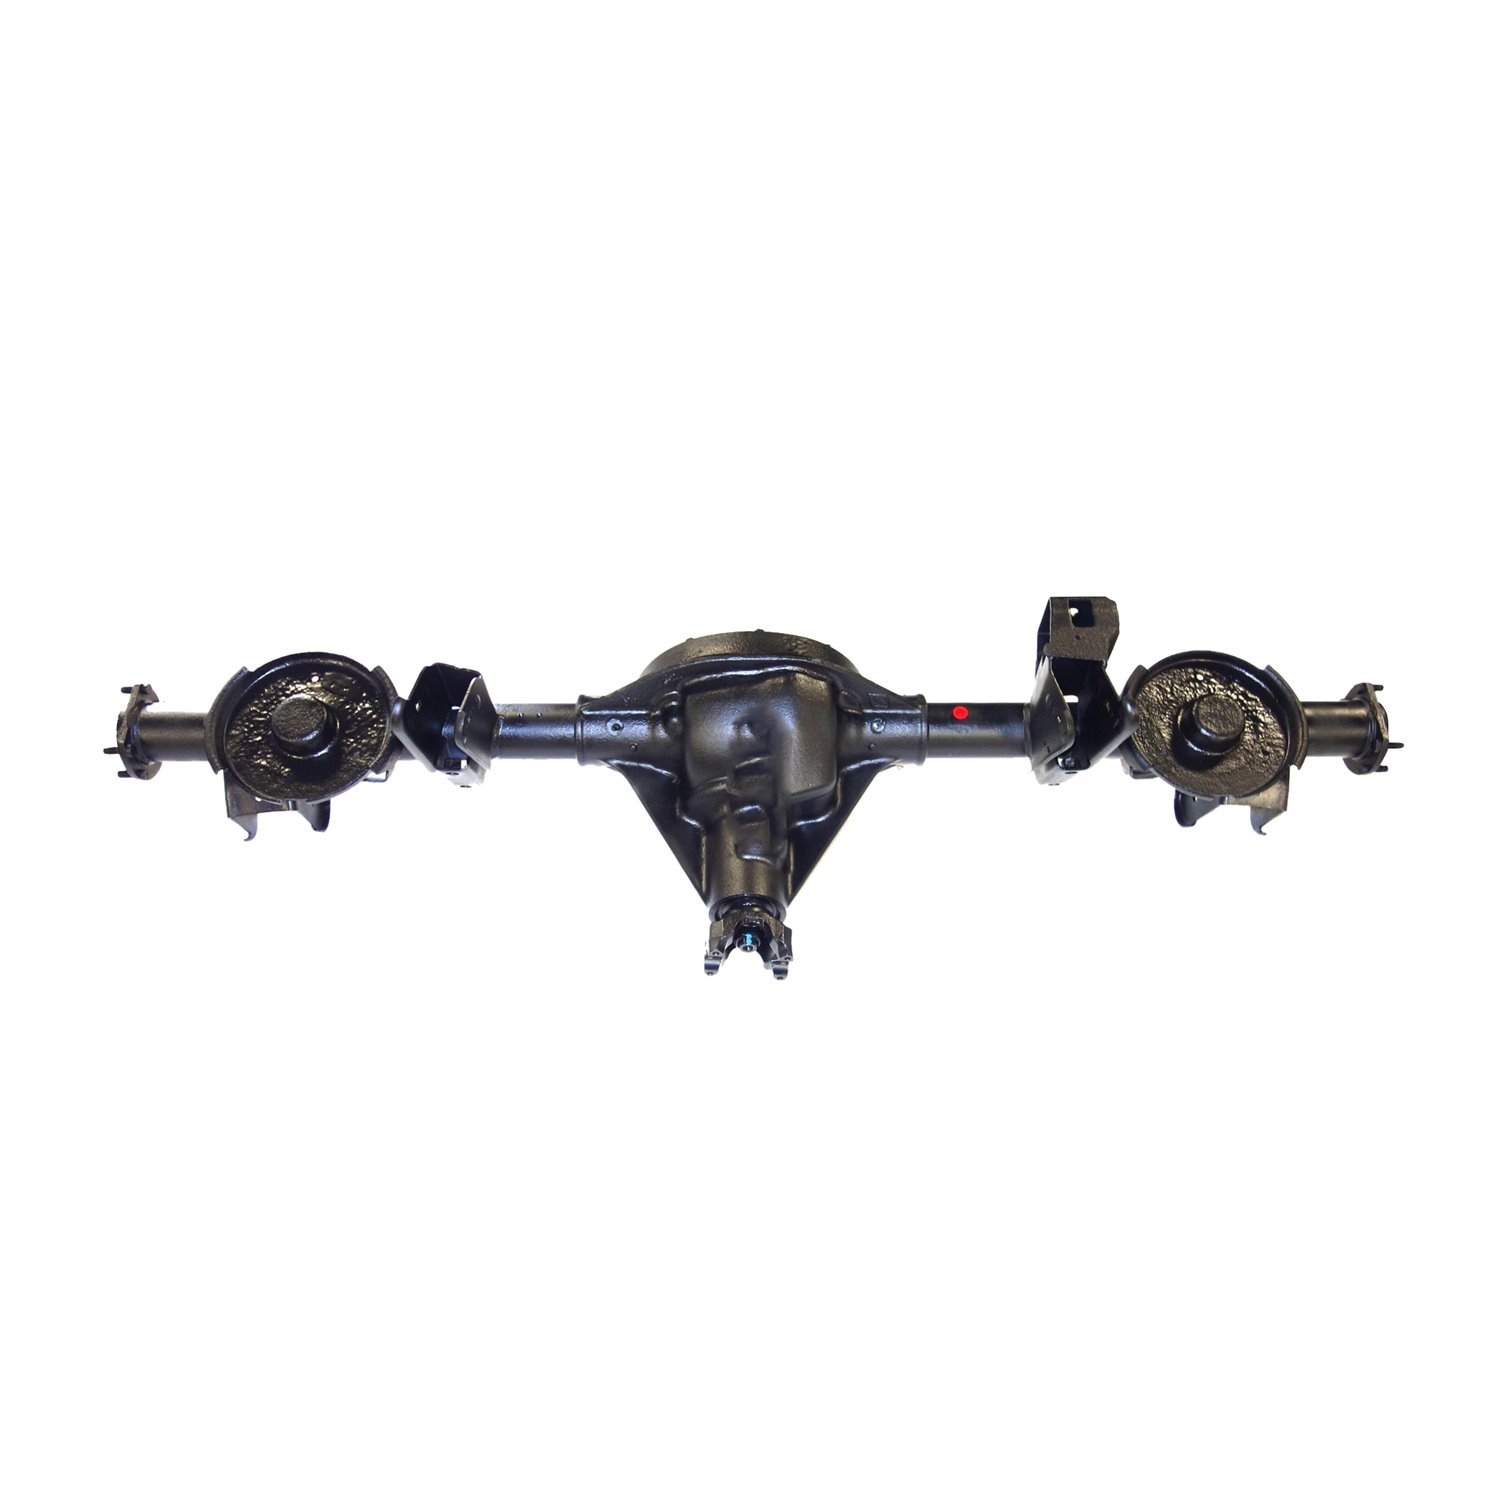 Remanufactured Complete Axle Assembly for Dana 35 03-05 Jeep Wrangler 3.07 Ratio